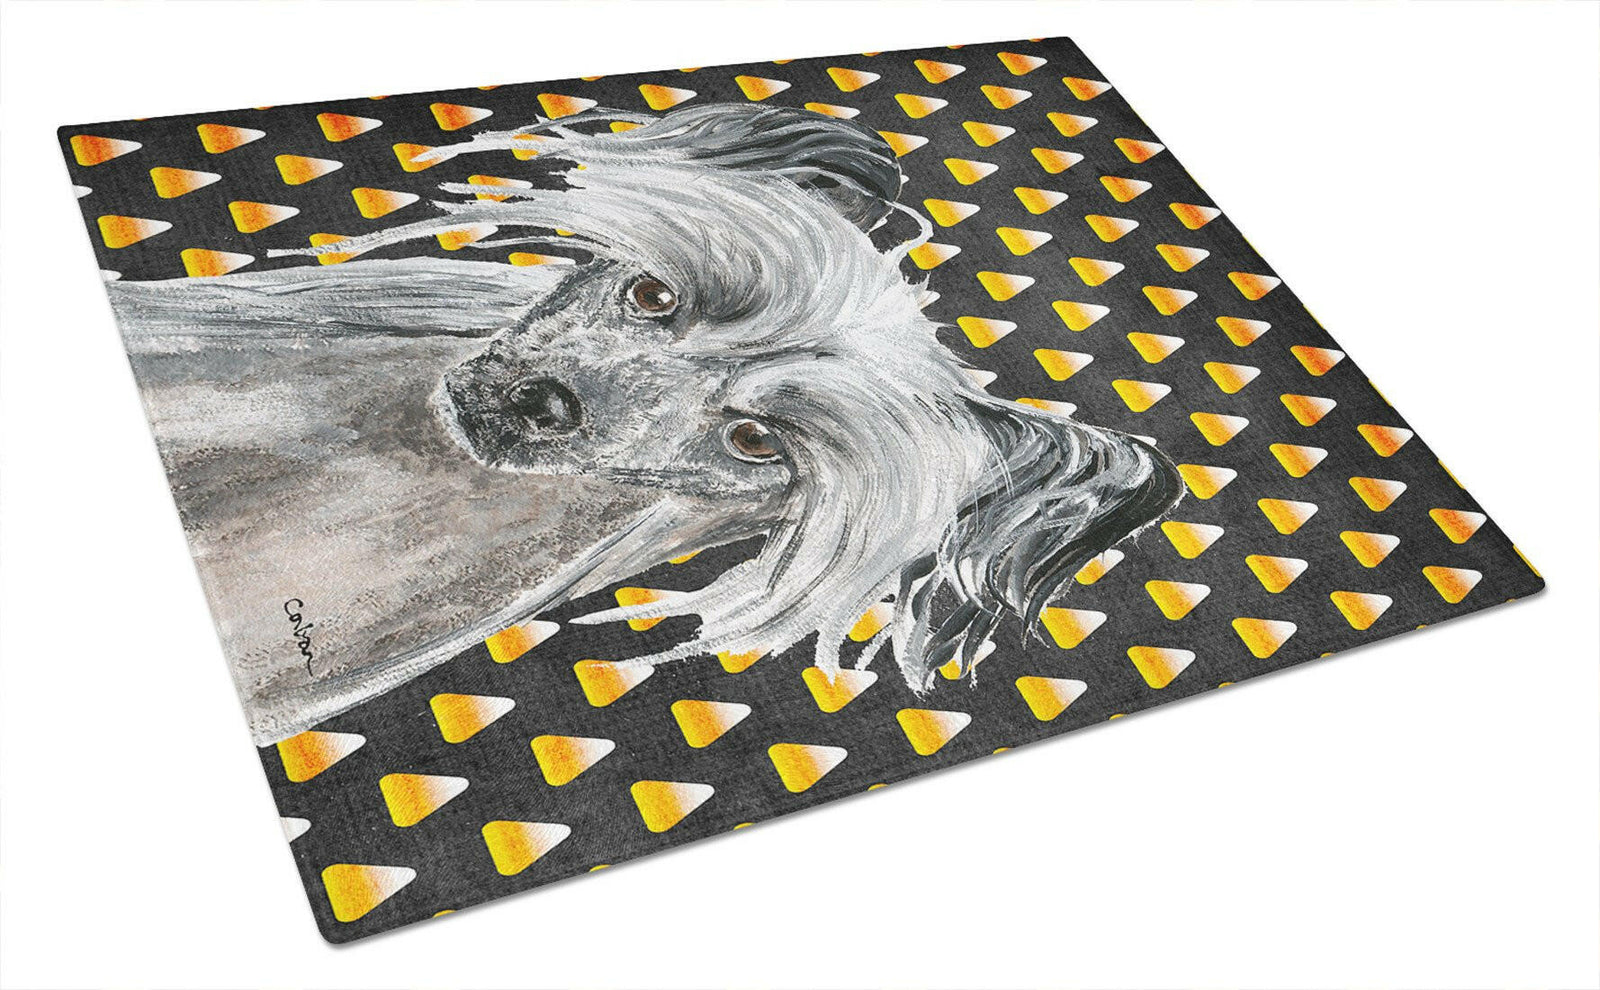 Chinese Crested Halloween Candy Corn Glass Cutting Board Large by Caroline's Treasures